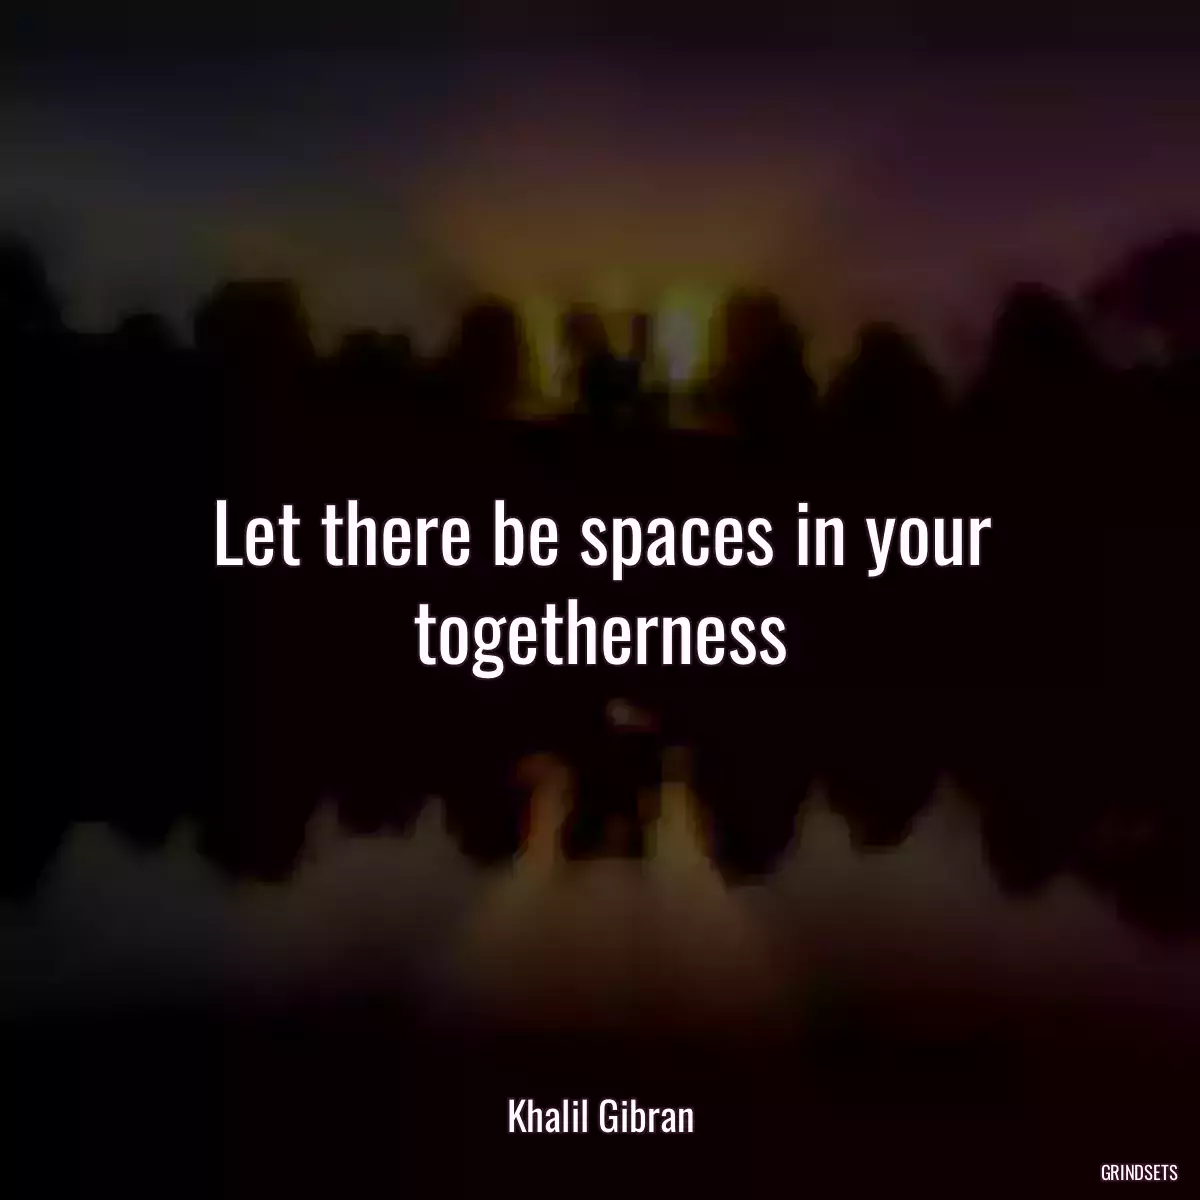 Let there be spaces in your togetherness